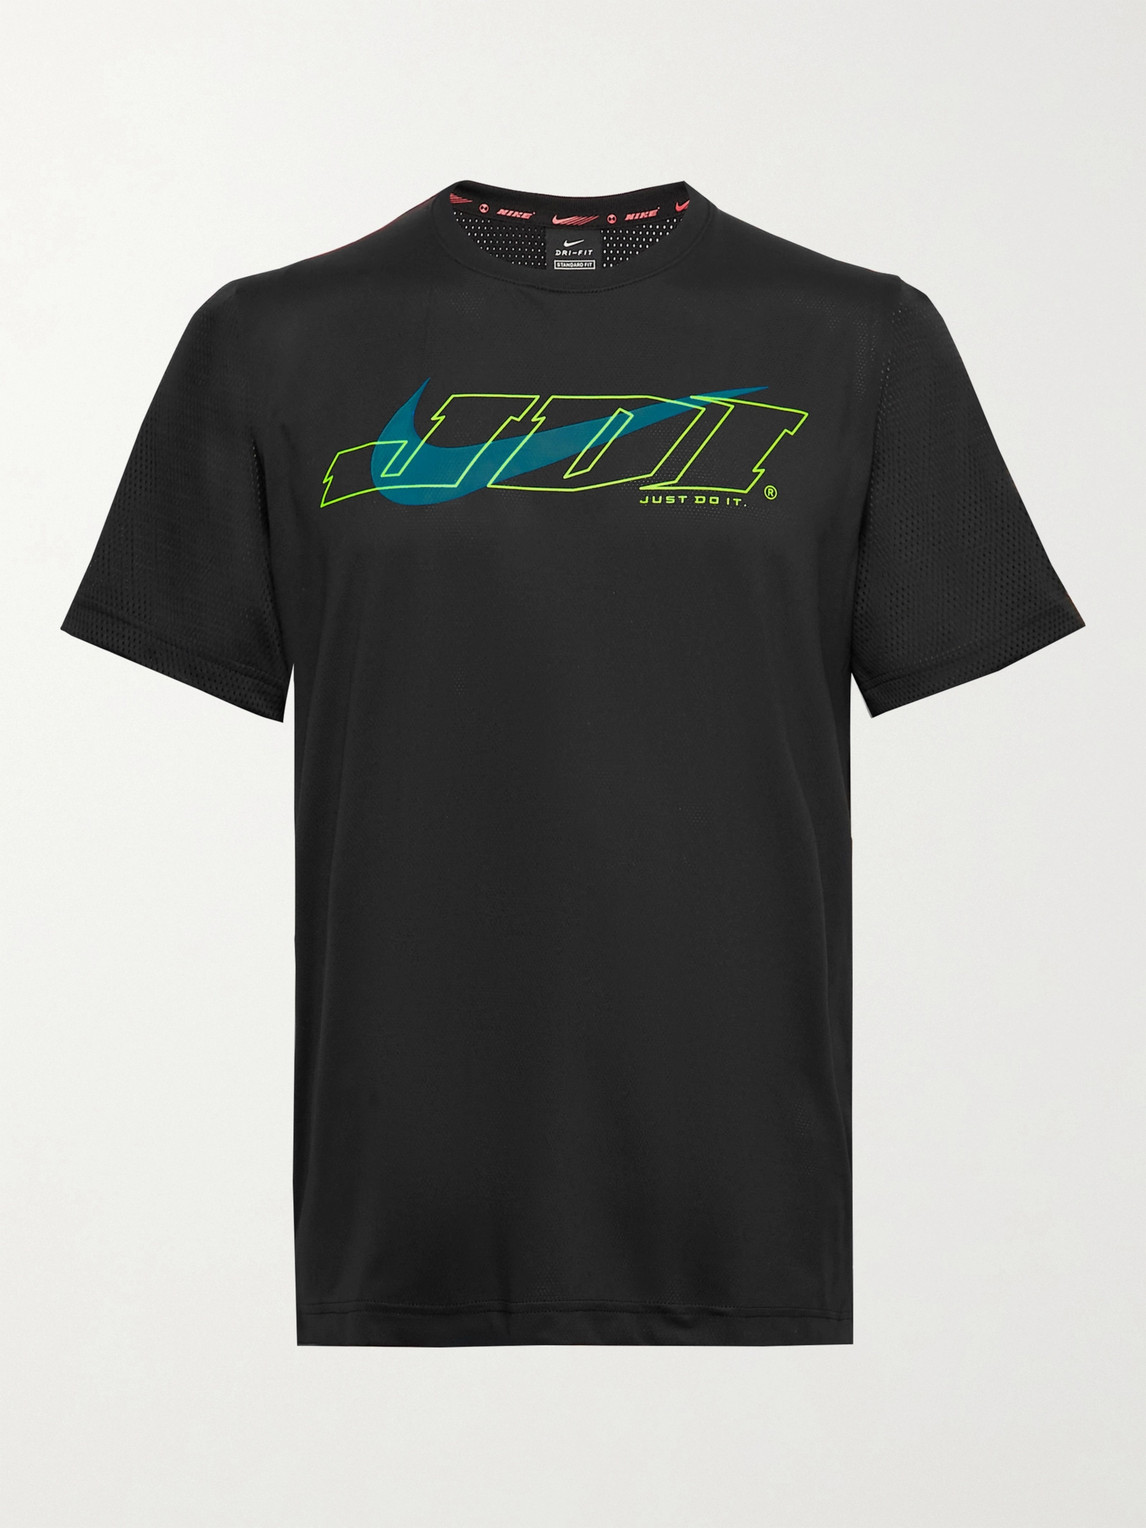 NIKE SPORT CLASH LOGO-PRINT PERFORATED STRETCH-JERSEY AND MESH T-SHIRT